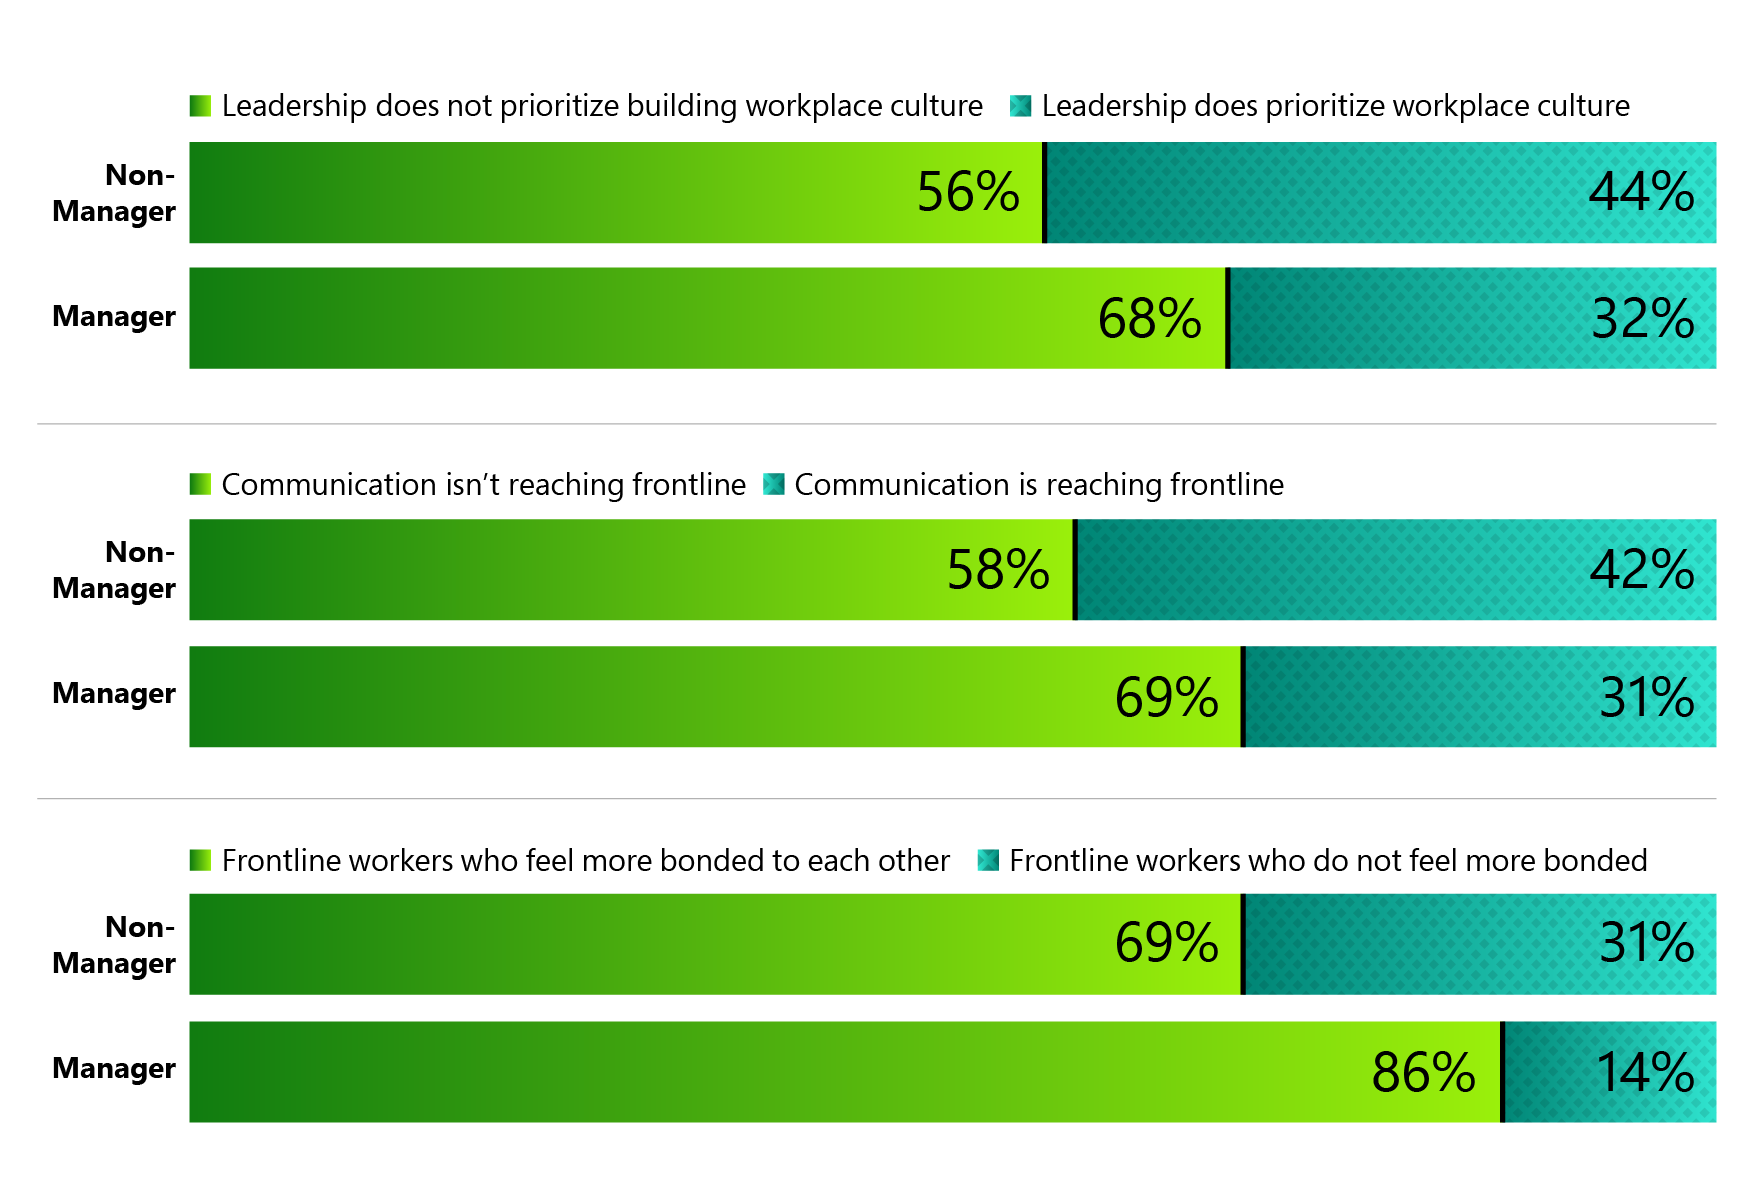 Fifty-six percent of non-managers on the frontline (and 68 percent of frontline managers) say leadership does not prioritize building workplace culture. Fifty-eight percent of non-managers (and 69 percent of managers) say communication isn’t reaching the frontline. Sixty-nine percent of non-managers say they feel more bonded to each other; so do 86 percent of managers.